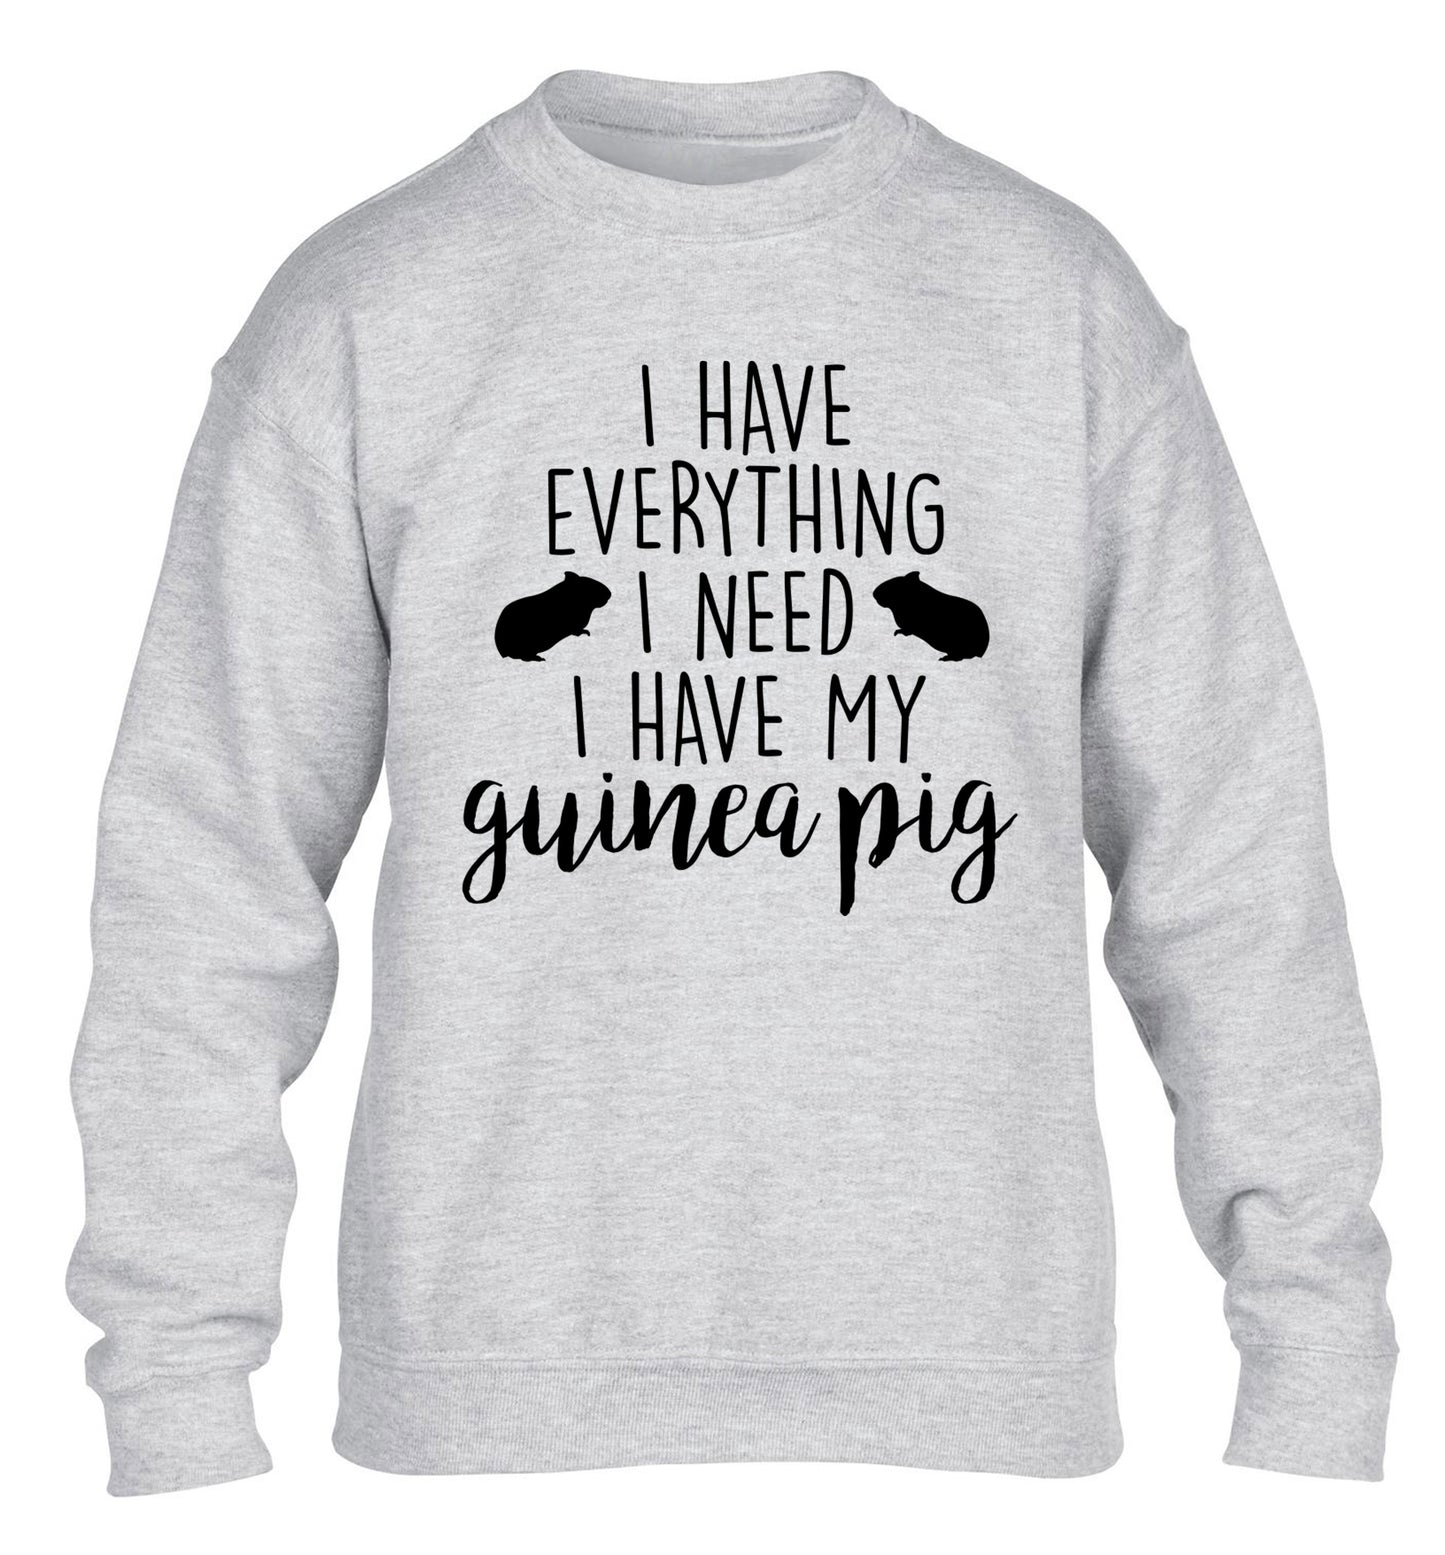 I have everything I need, I have my guinea pig children's grey  sweater 12-14 Years